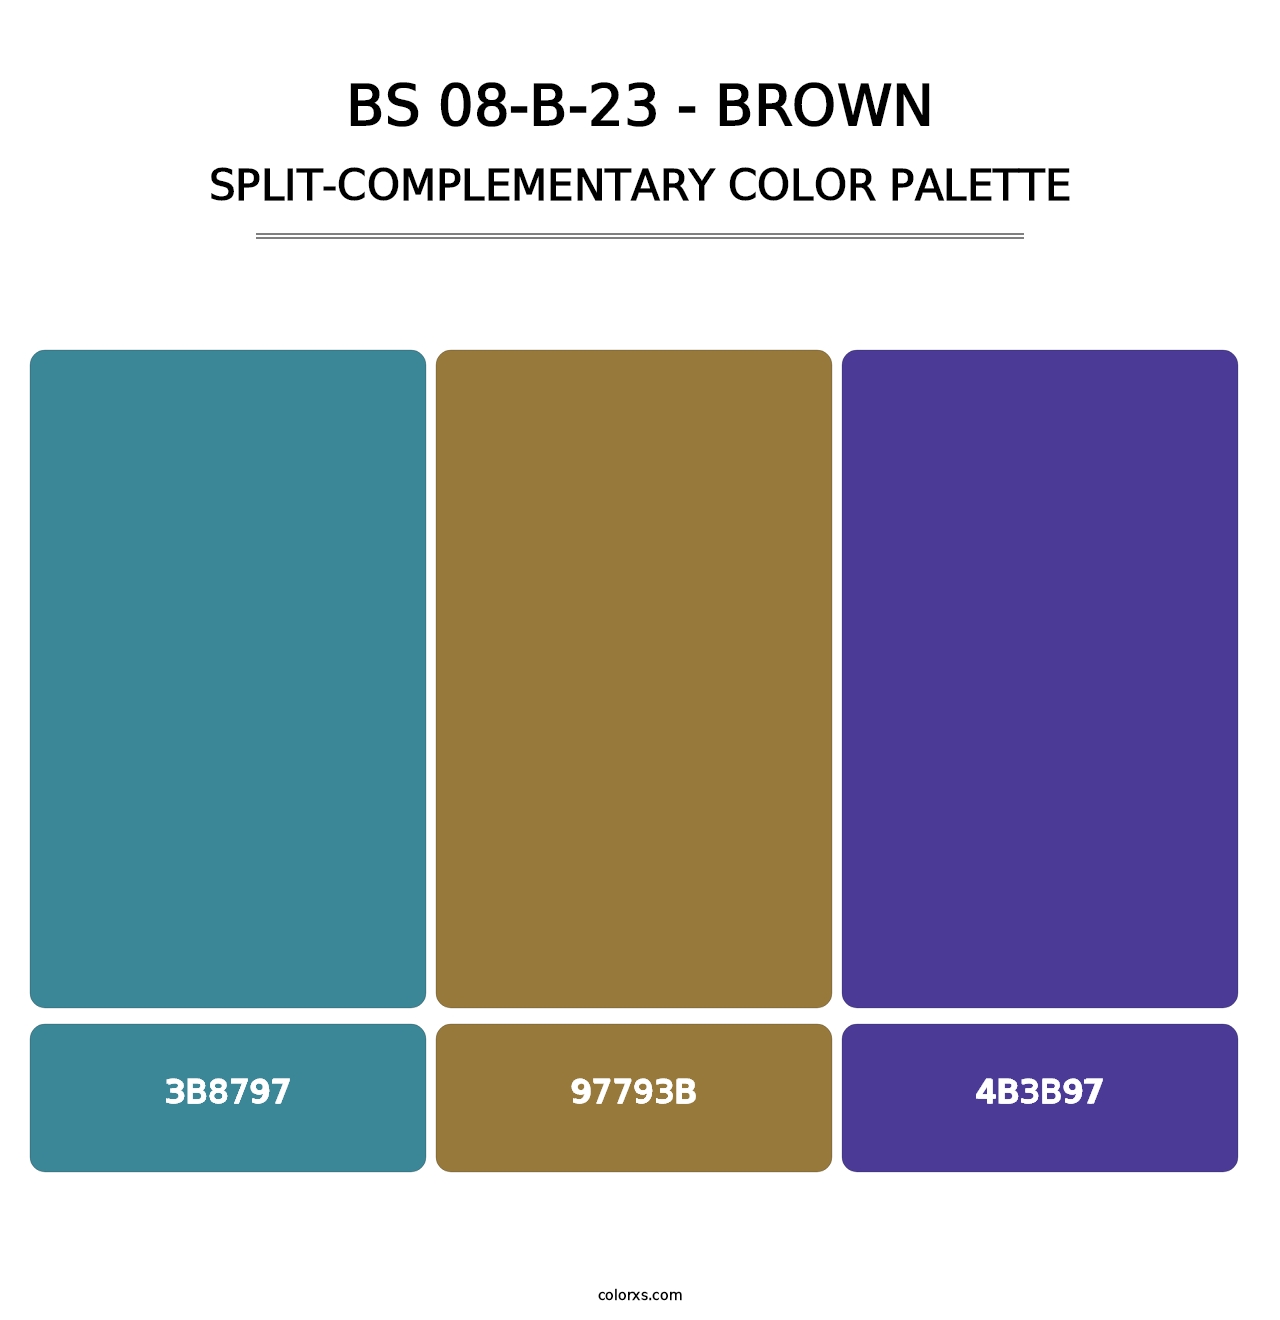 BS 08-B-23 - Brown - Split-Complementary Color Palette